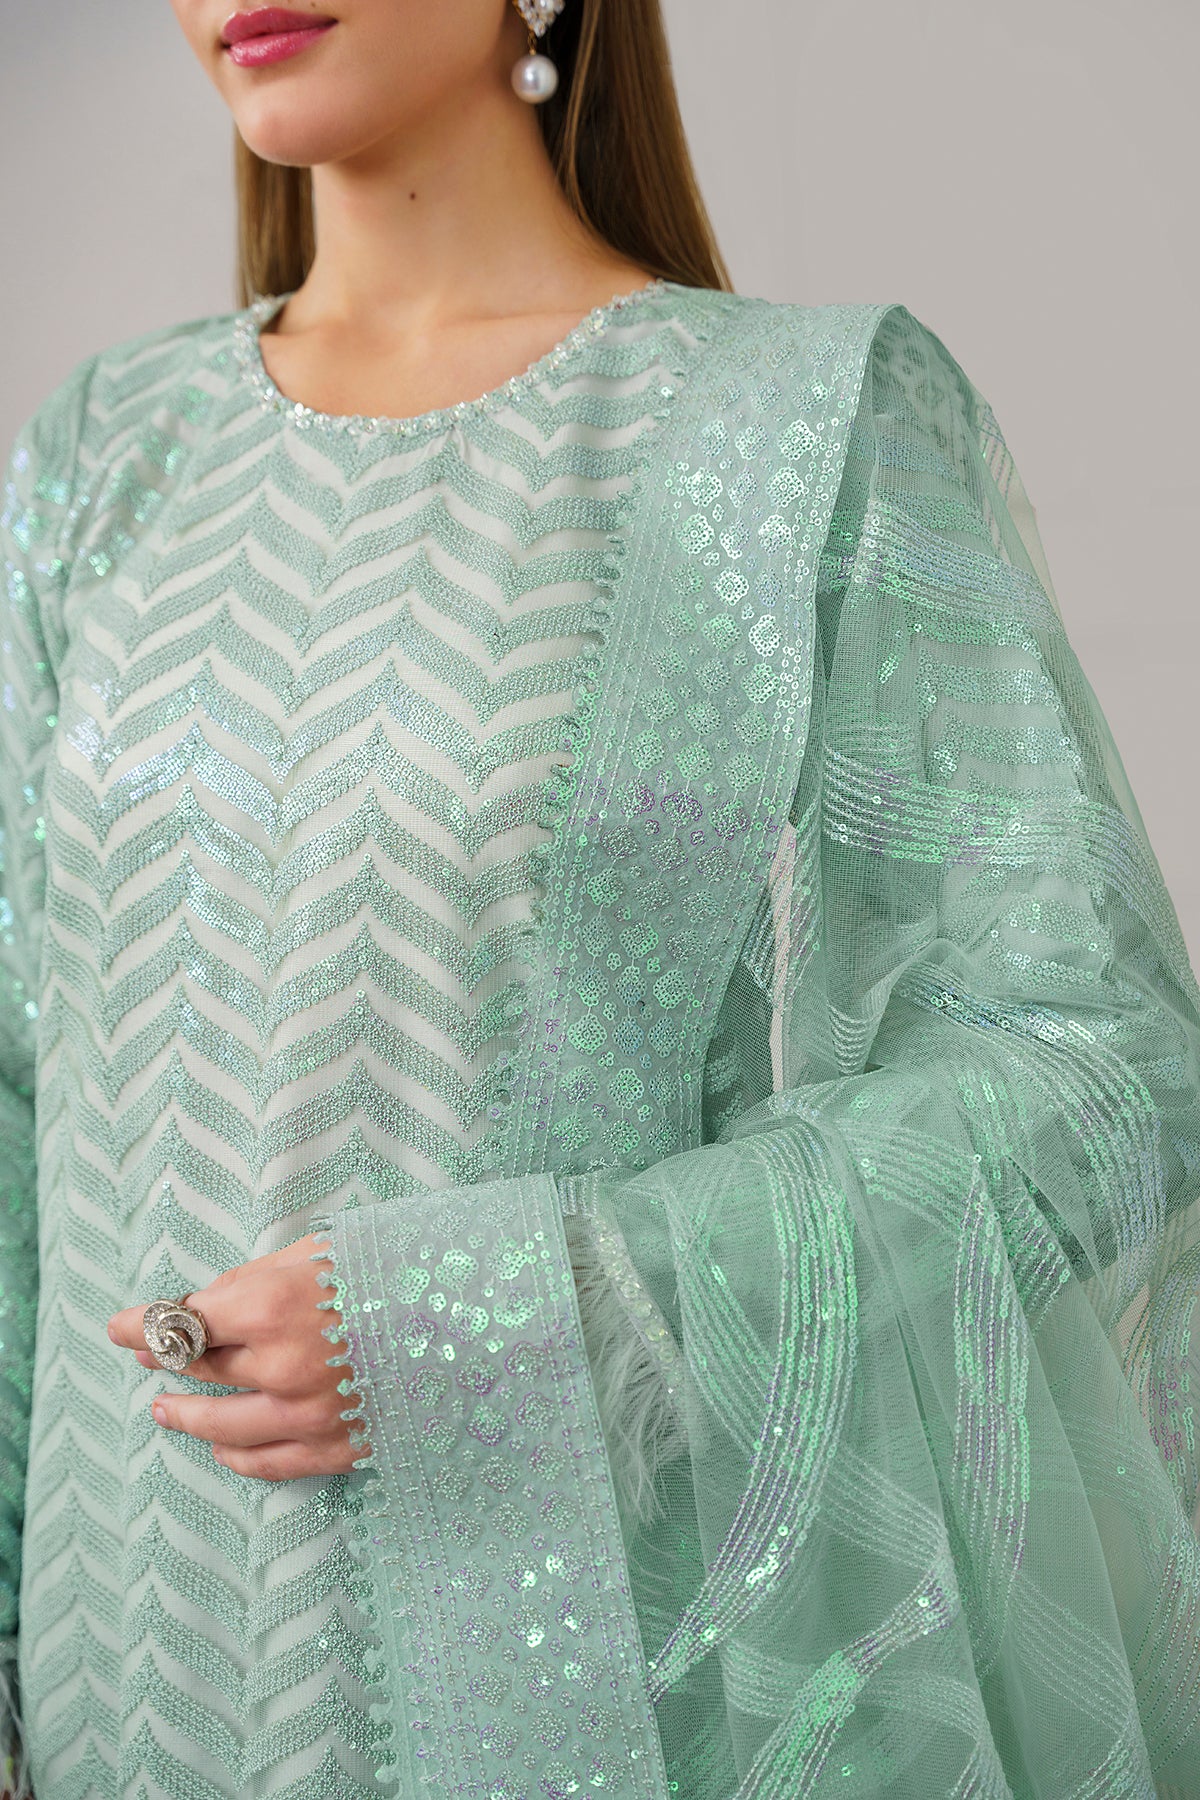 EMBROIDERED NET UF-517